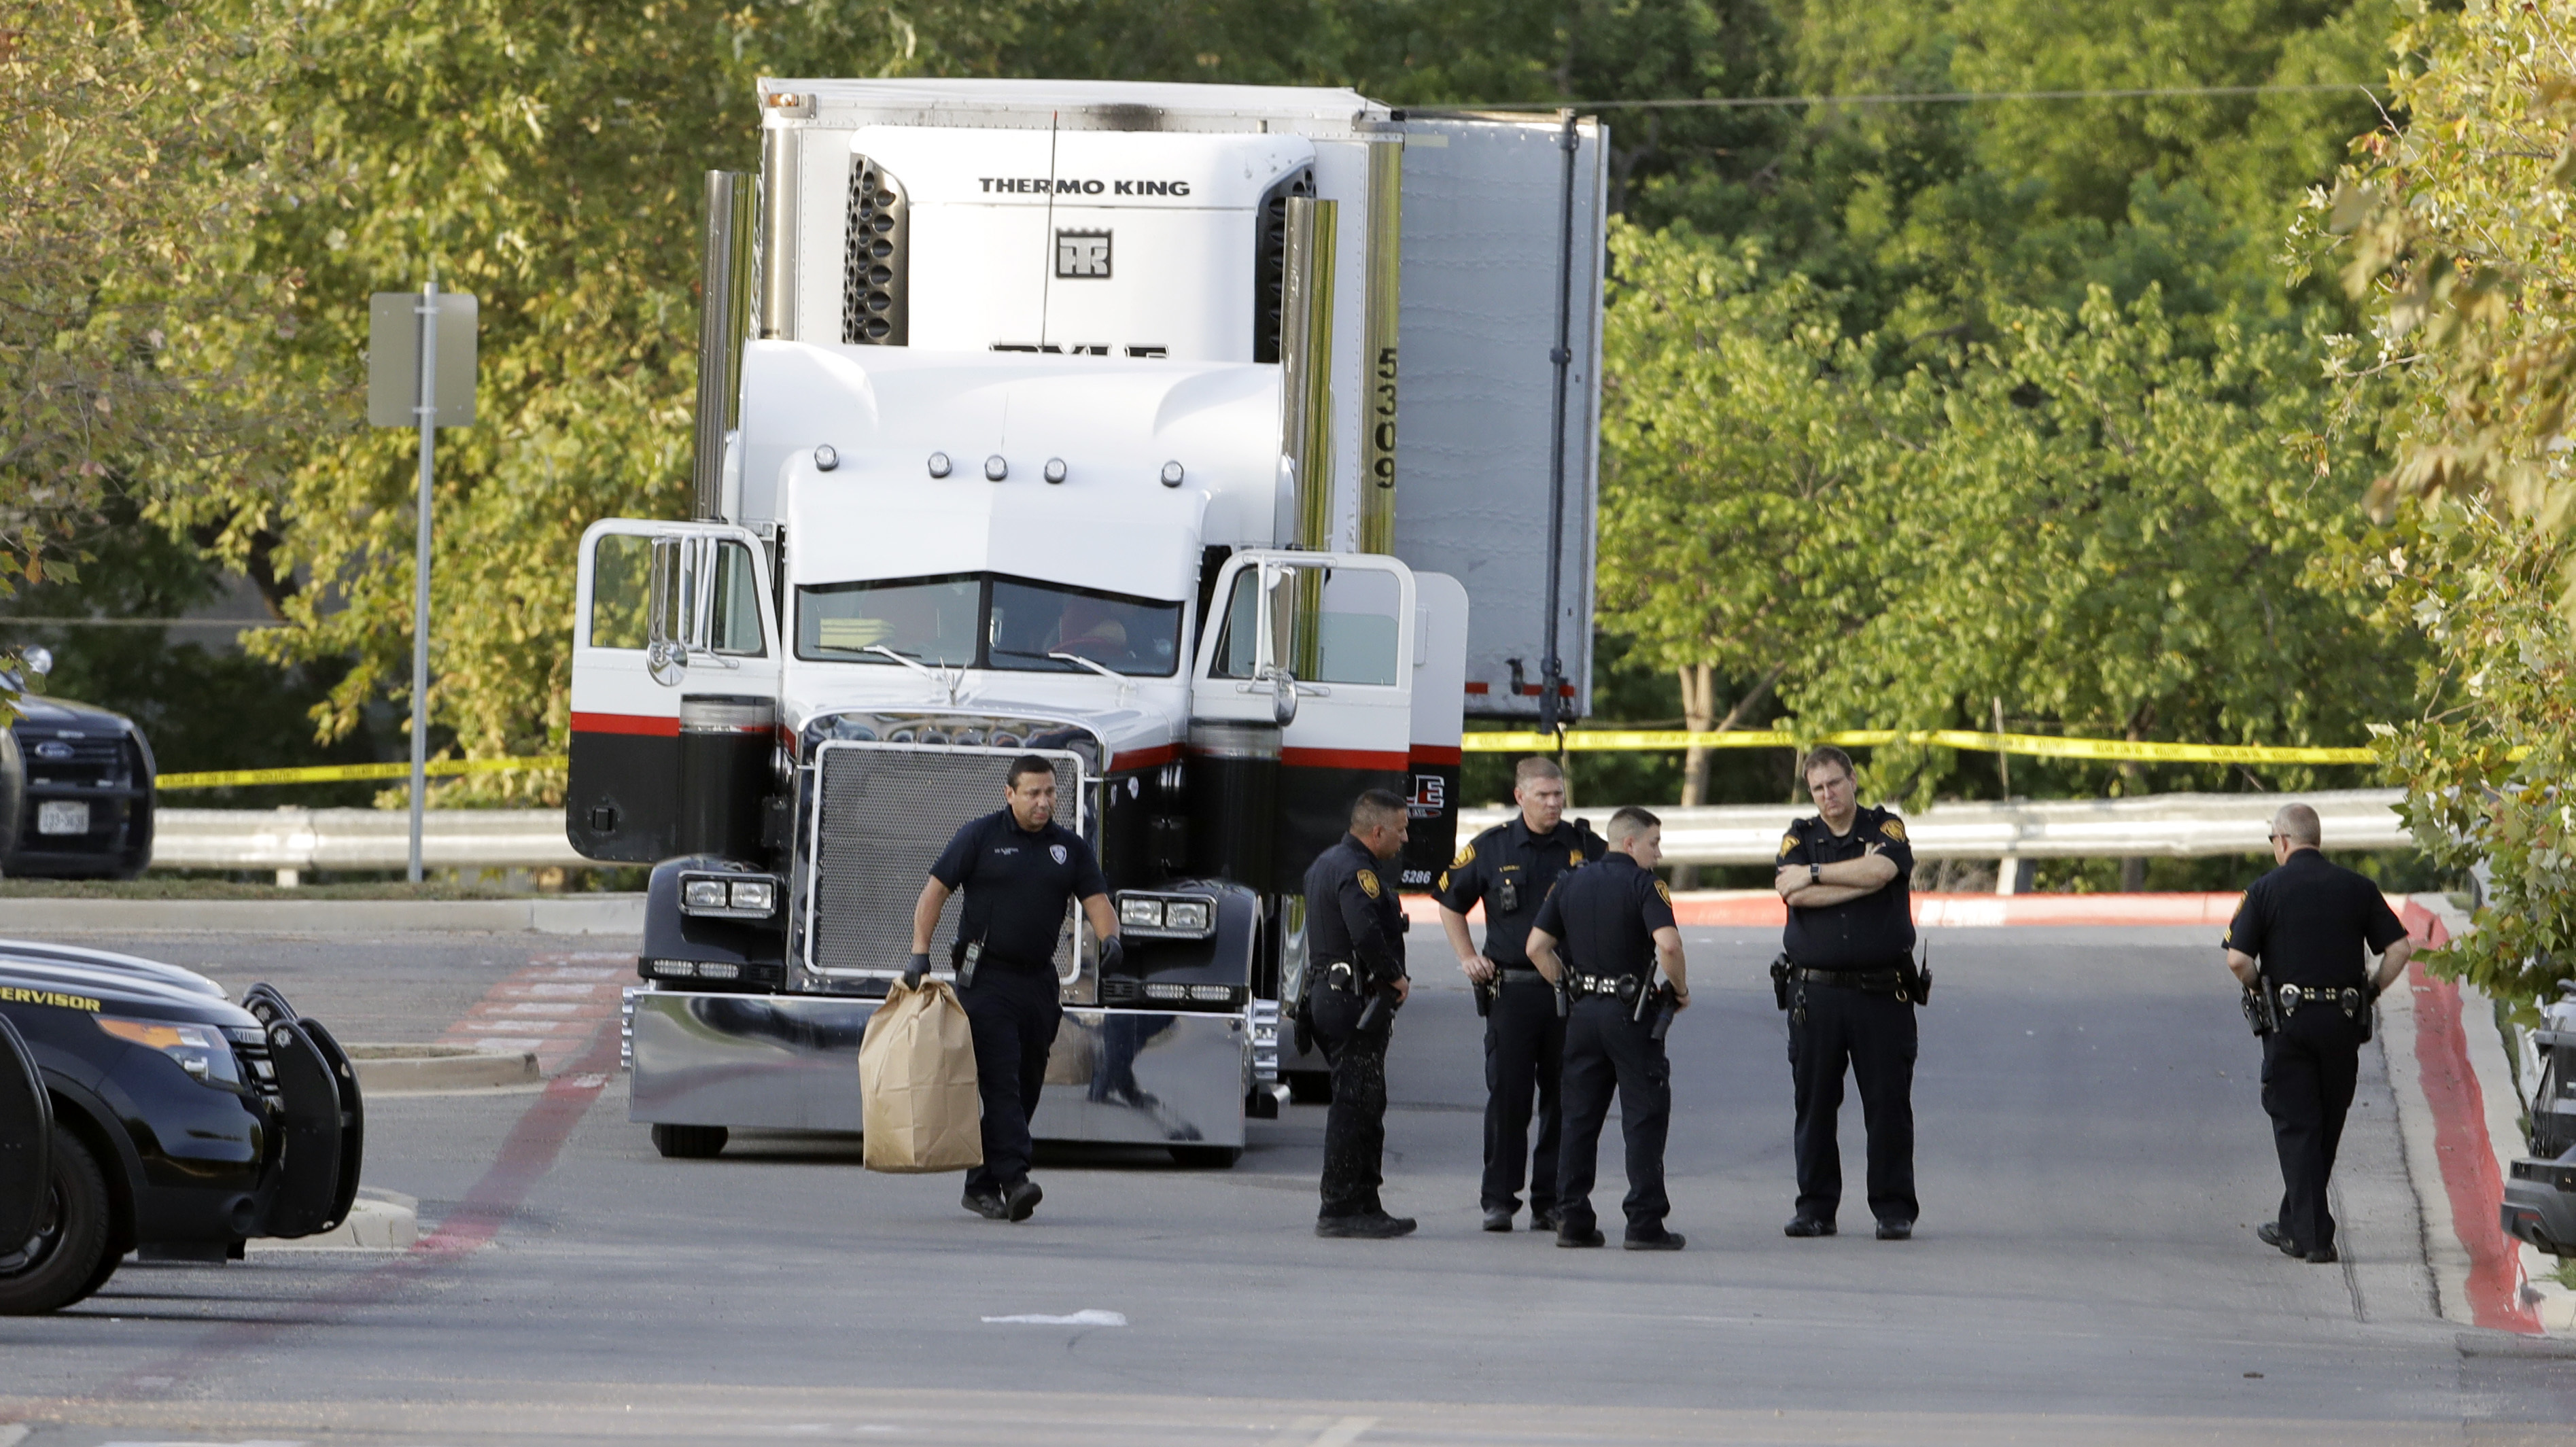 San Antonio police officers investigate the scene Sunday, July 23, 2017, where eight people were found dead in a tractor-trailer loaded with at least 30 others outside a Walmart store in stifling summer heat in what police are calling a horrific human trafficking case, in San Antonio. (Eric Gay&mdash;AP)